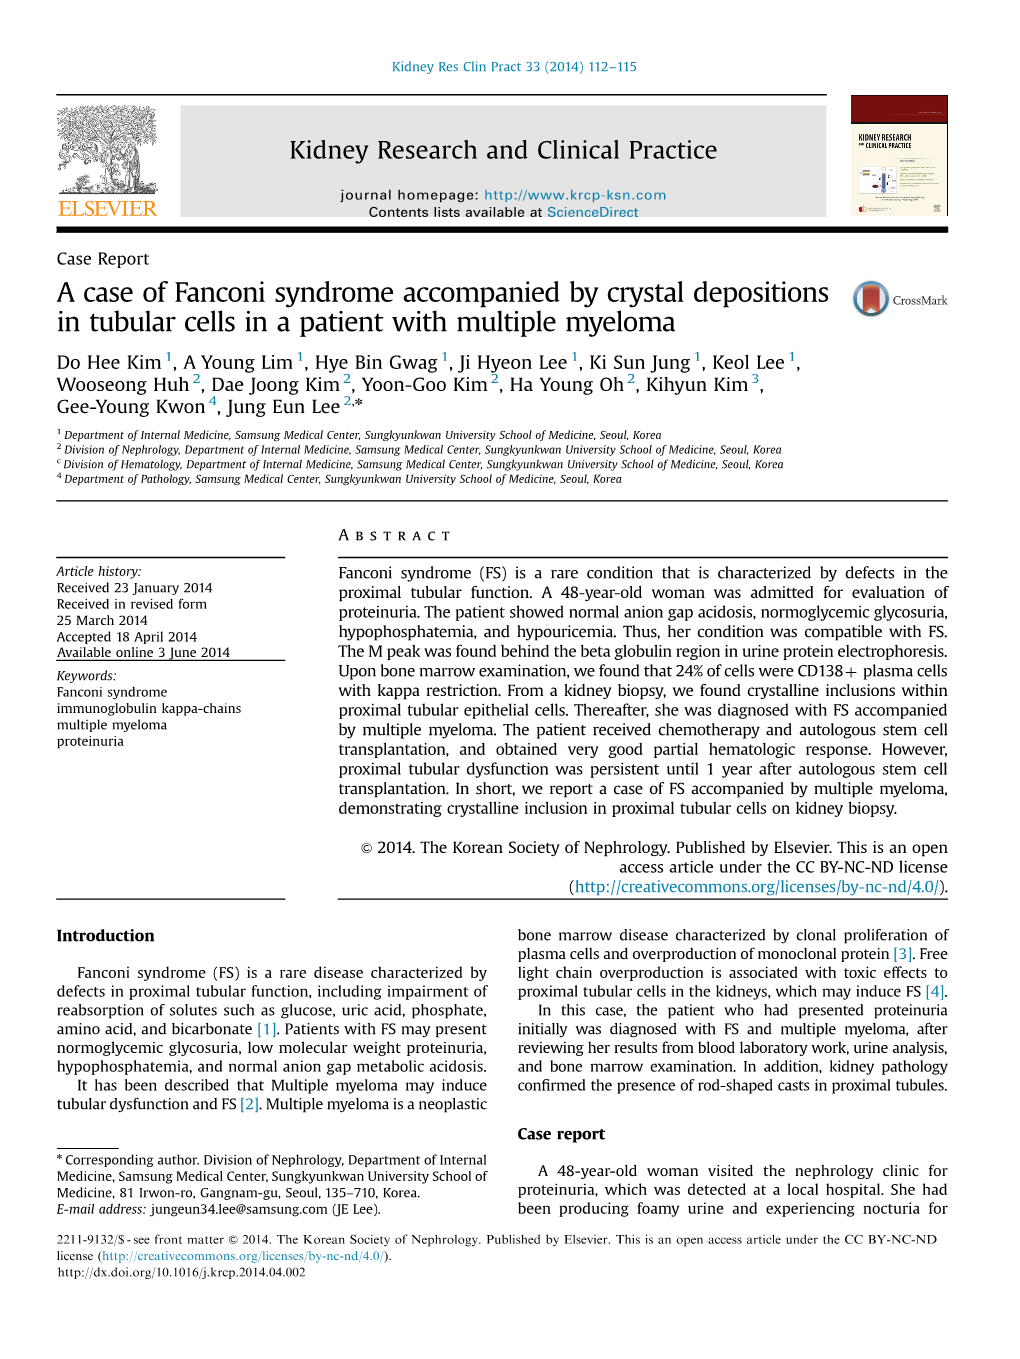 A Case of Fanconi Syndrome Accompanied by Crystal Depositions